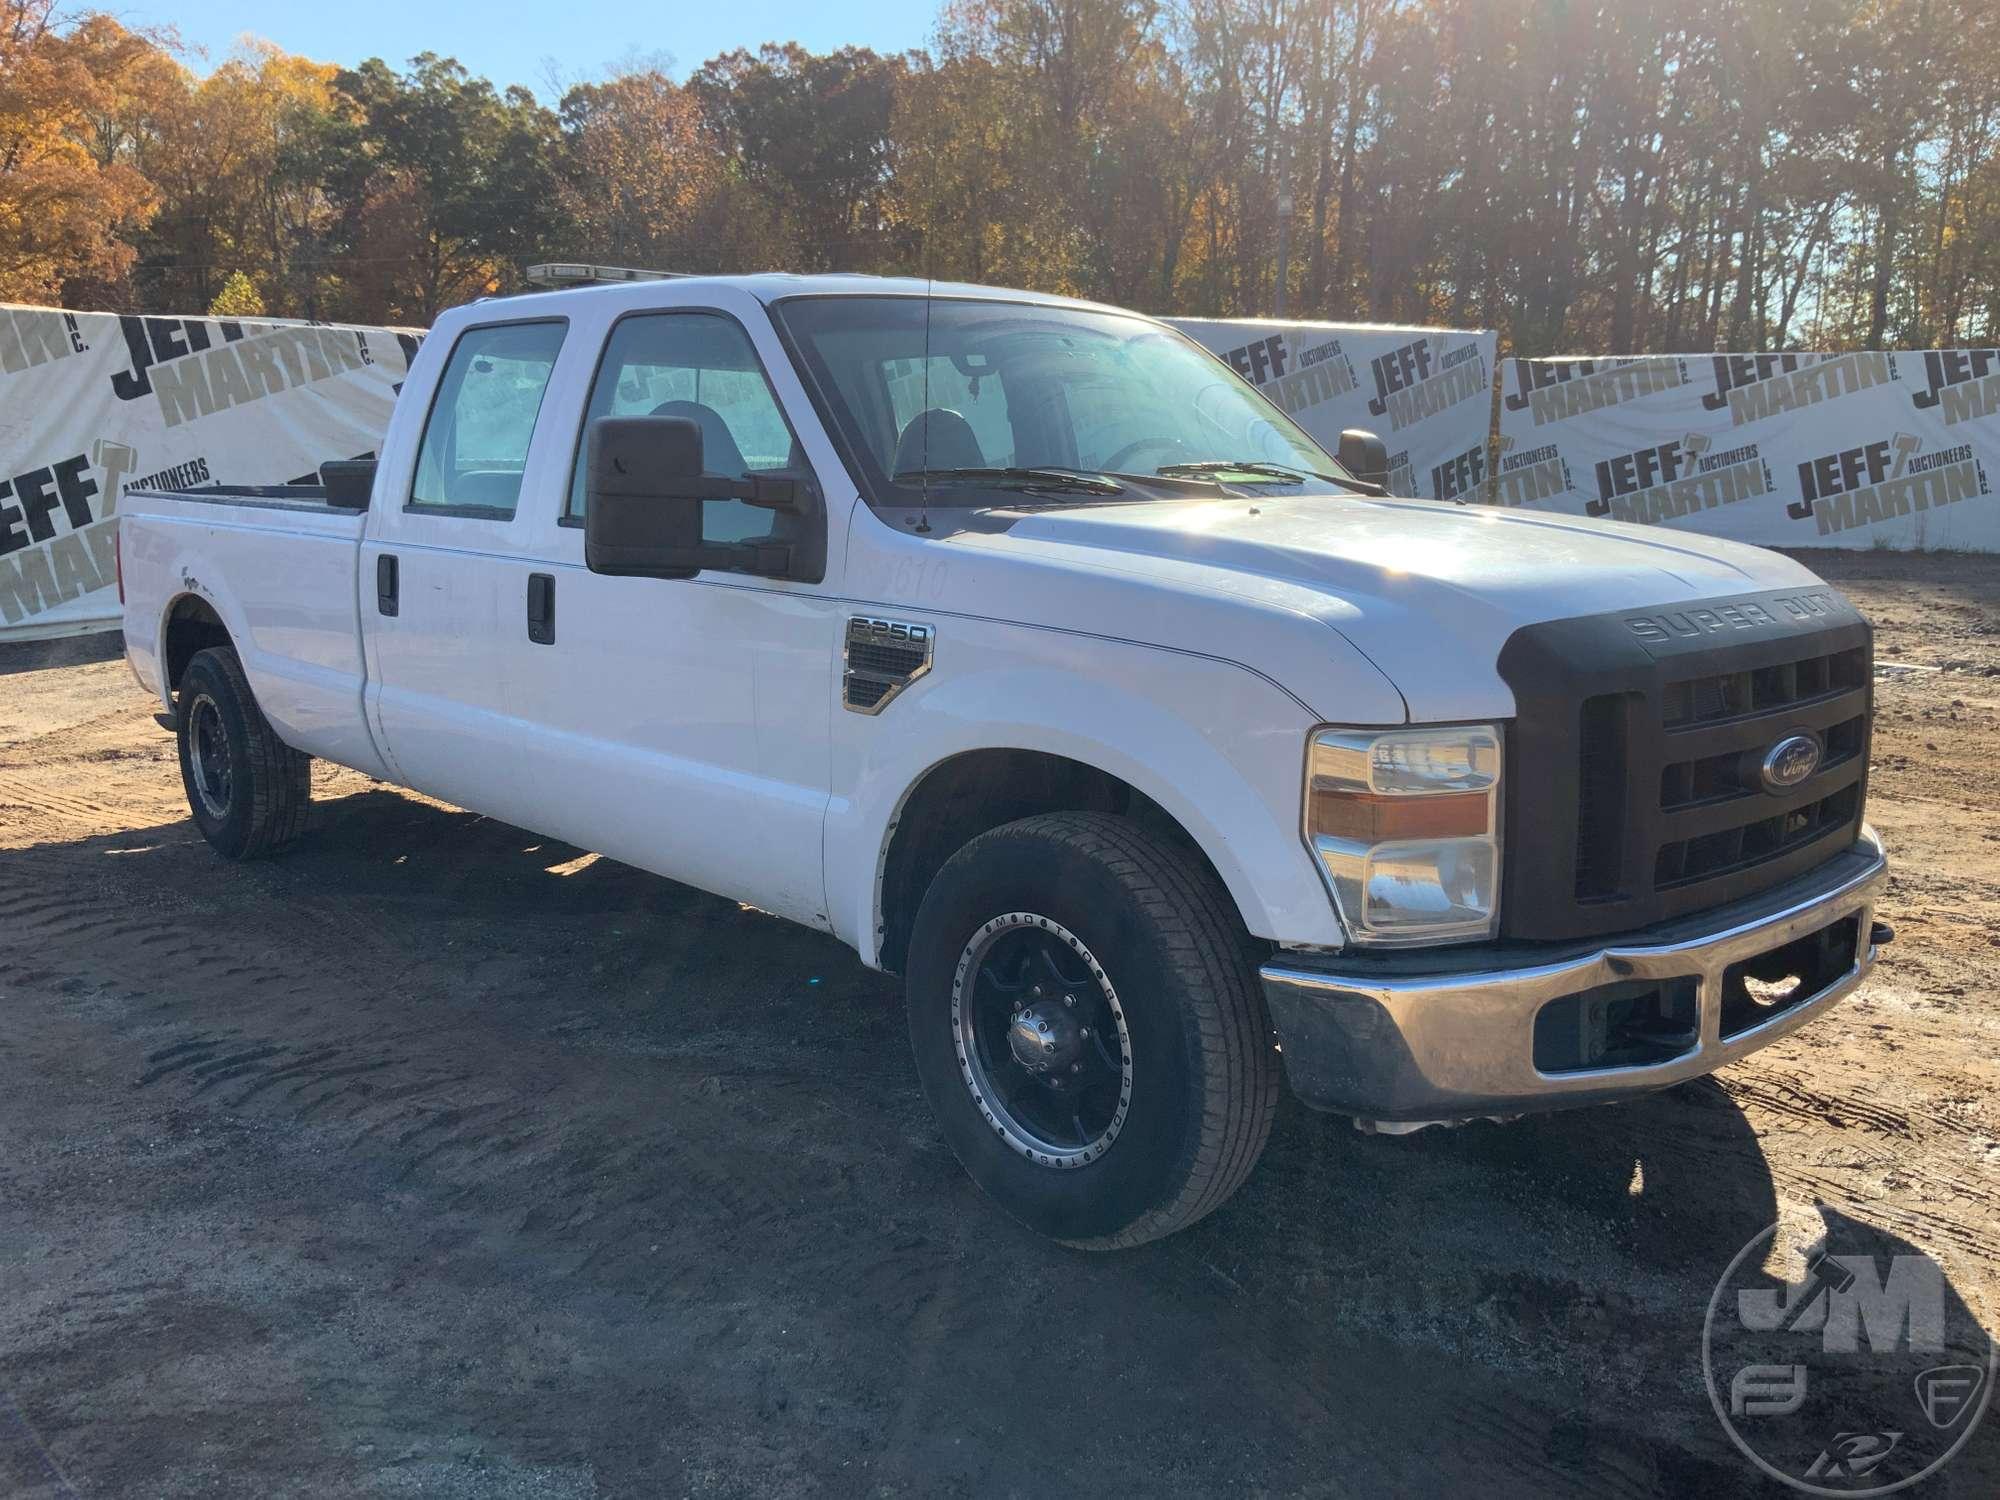 2010 FORD F-250 CREW CAB 3/4 TON PICKUP VIN: 1FTSW2A57AEA62433